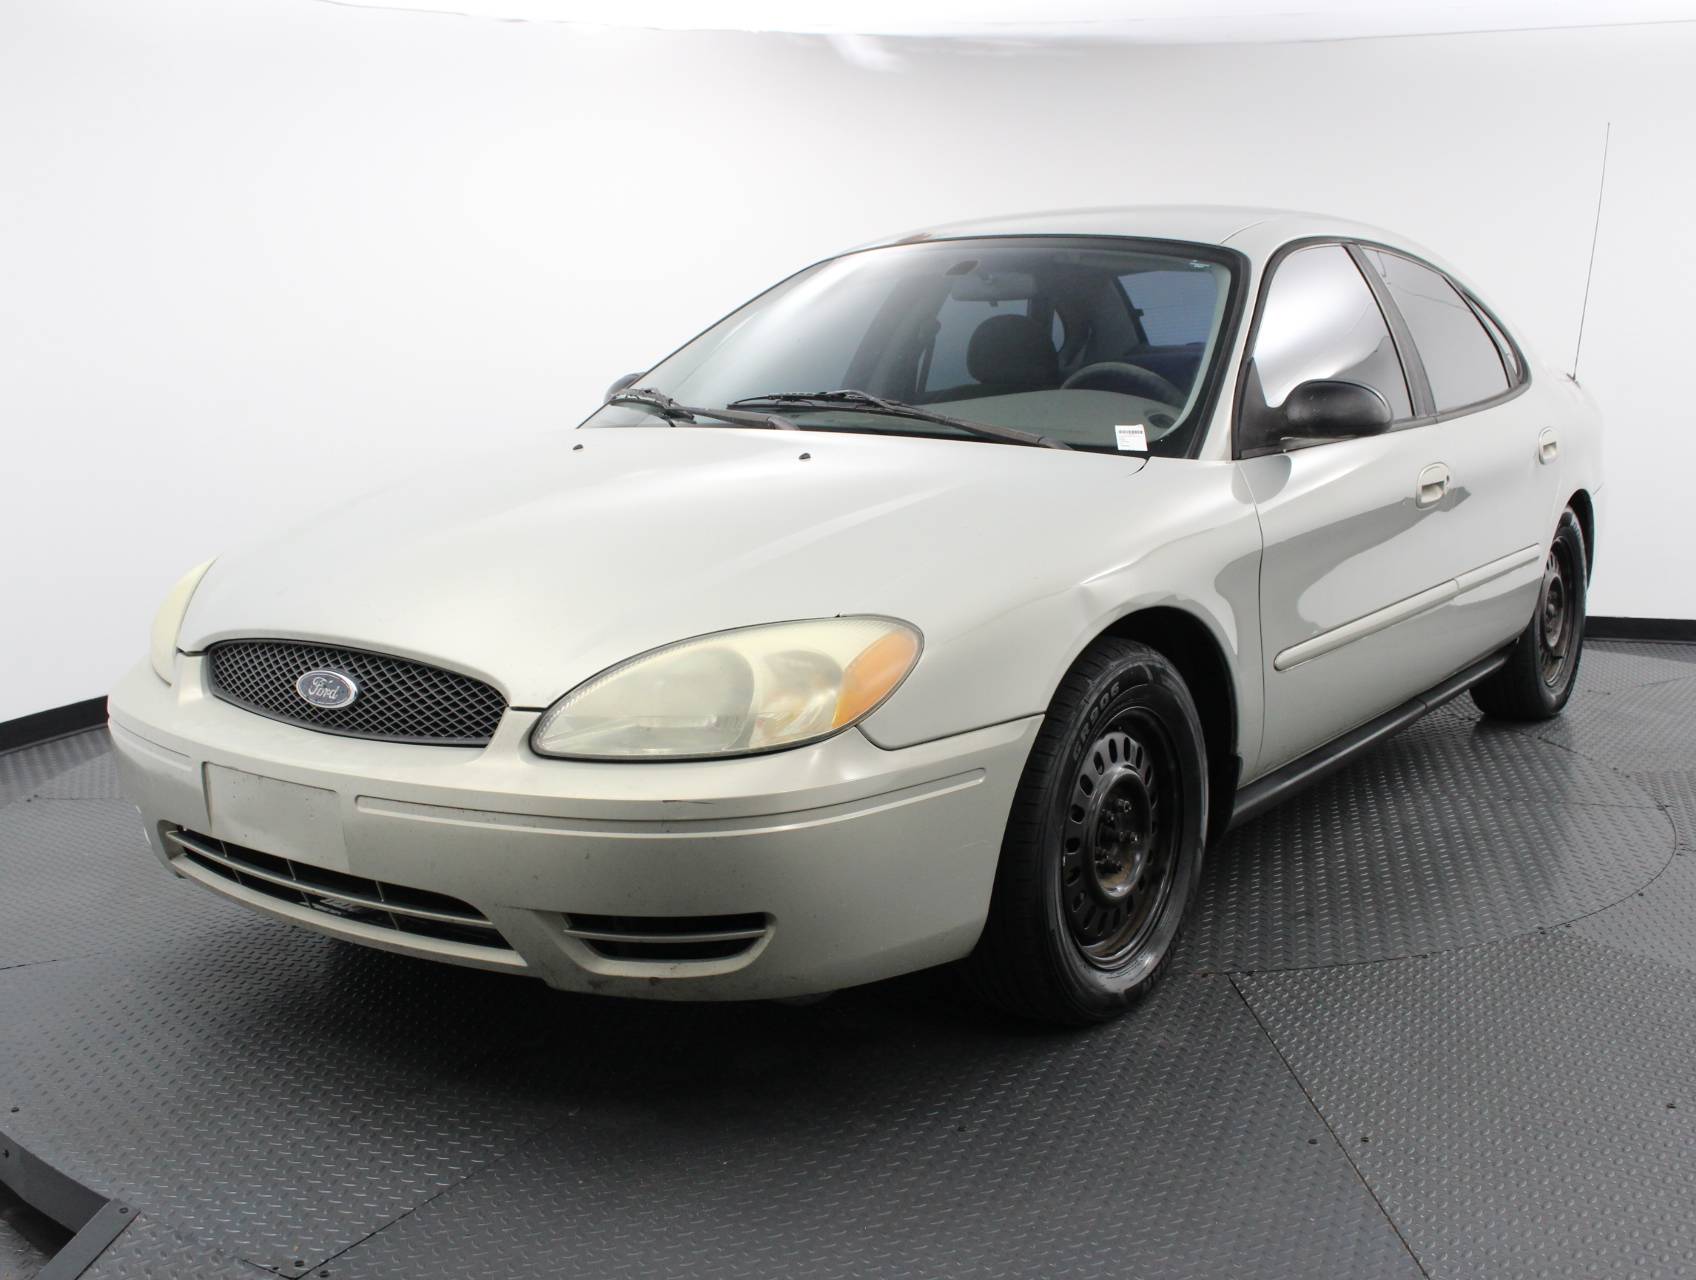 Used 2005 FORD TAURUS SE for sale in WEST PALM | 120866